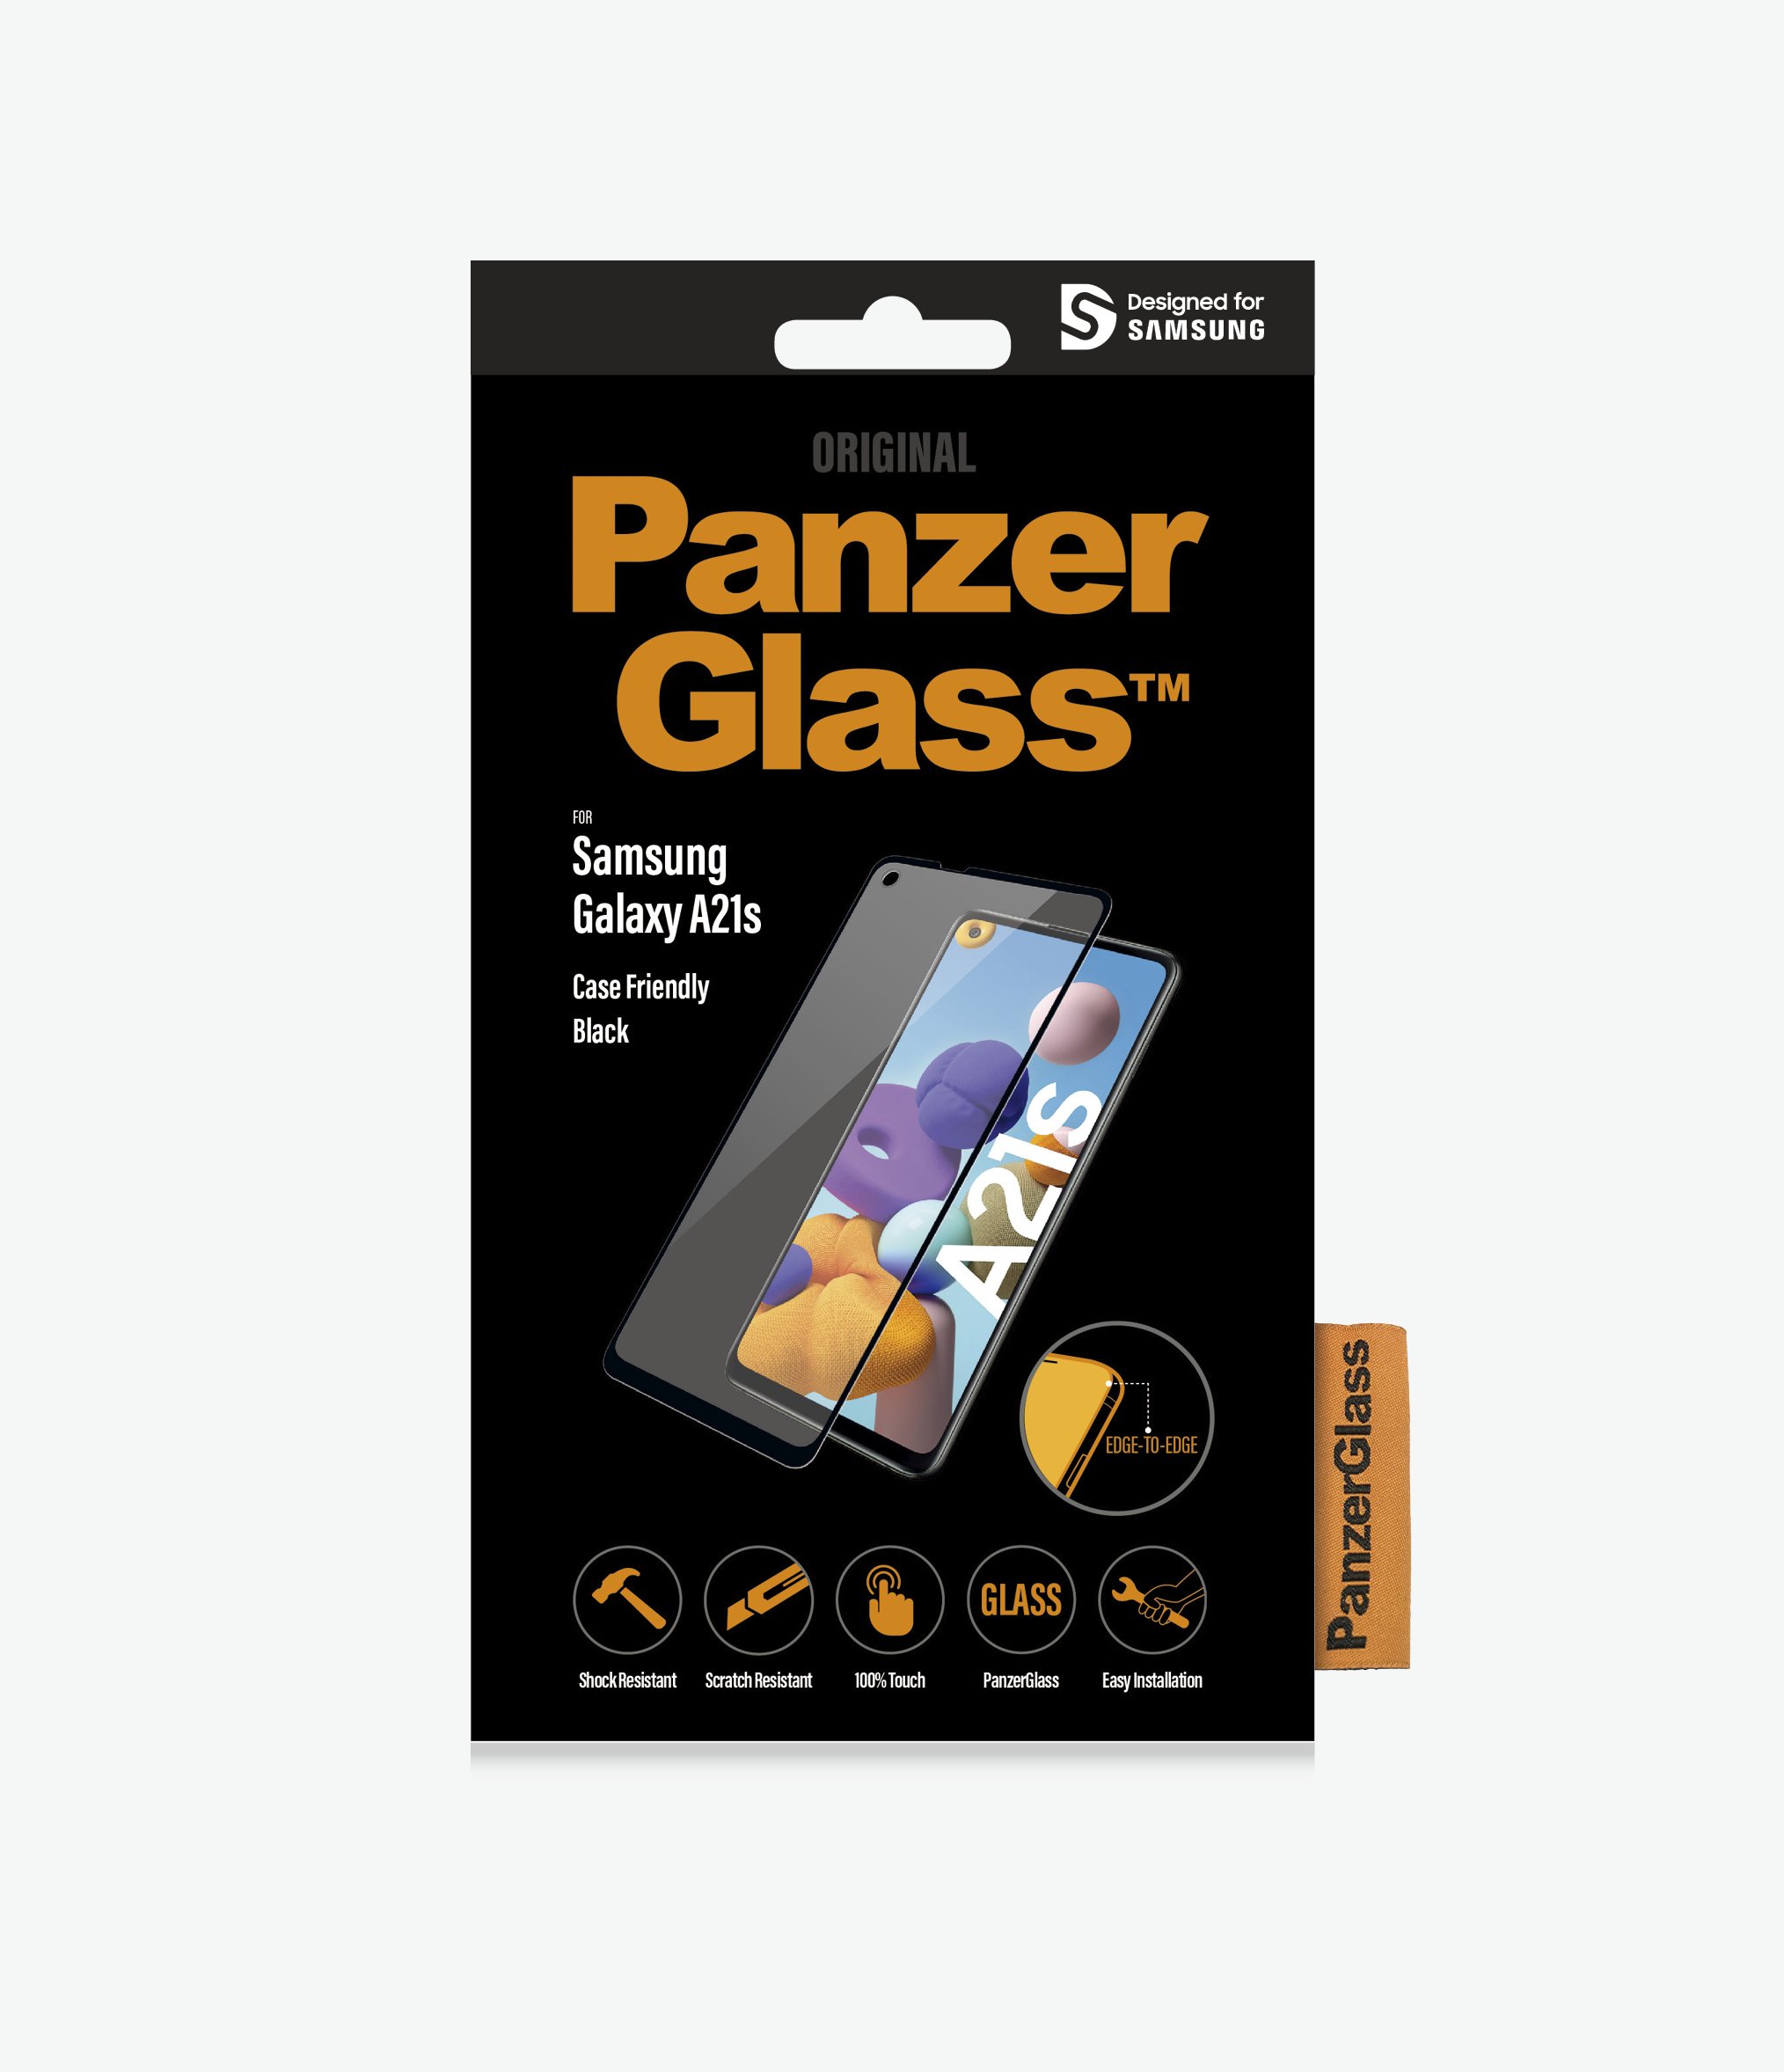 PanzerGlass™ Samsung Galaxy A21s - Case-friendly - Clear Glass (7235) - Screen Protector - Full frame coverage, Rounded edges, Crystal clear